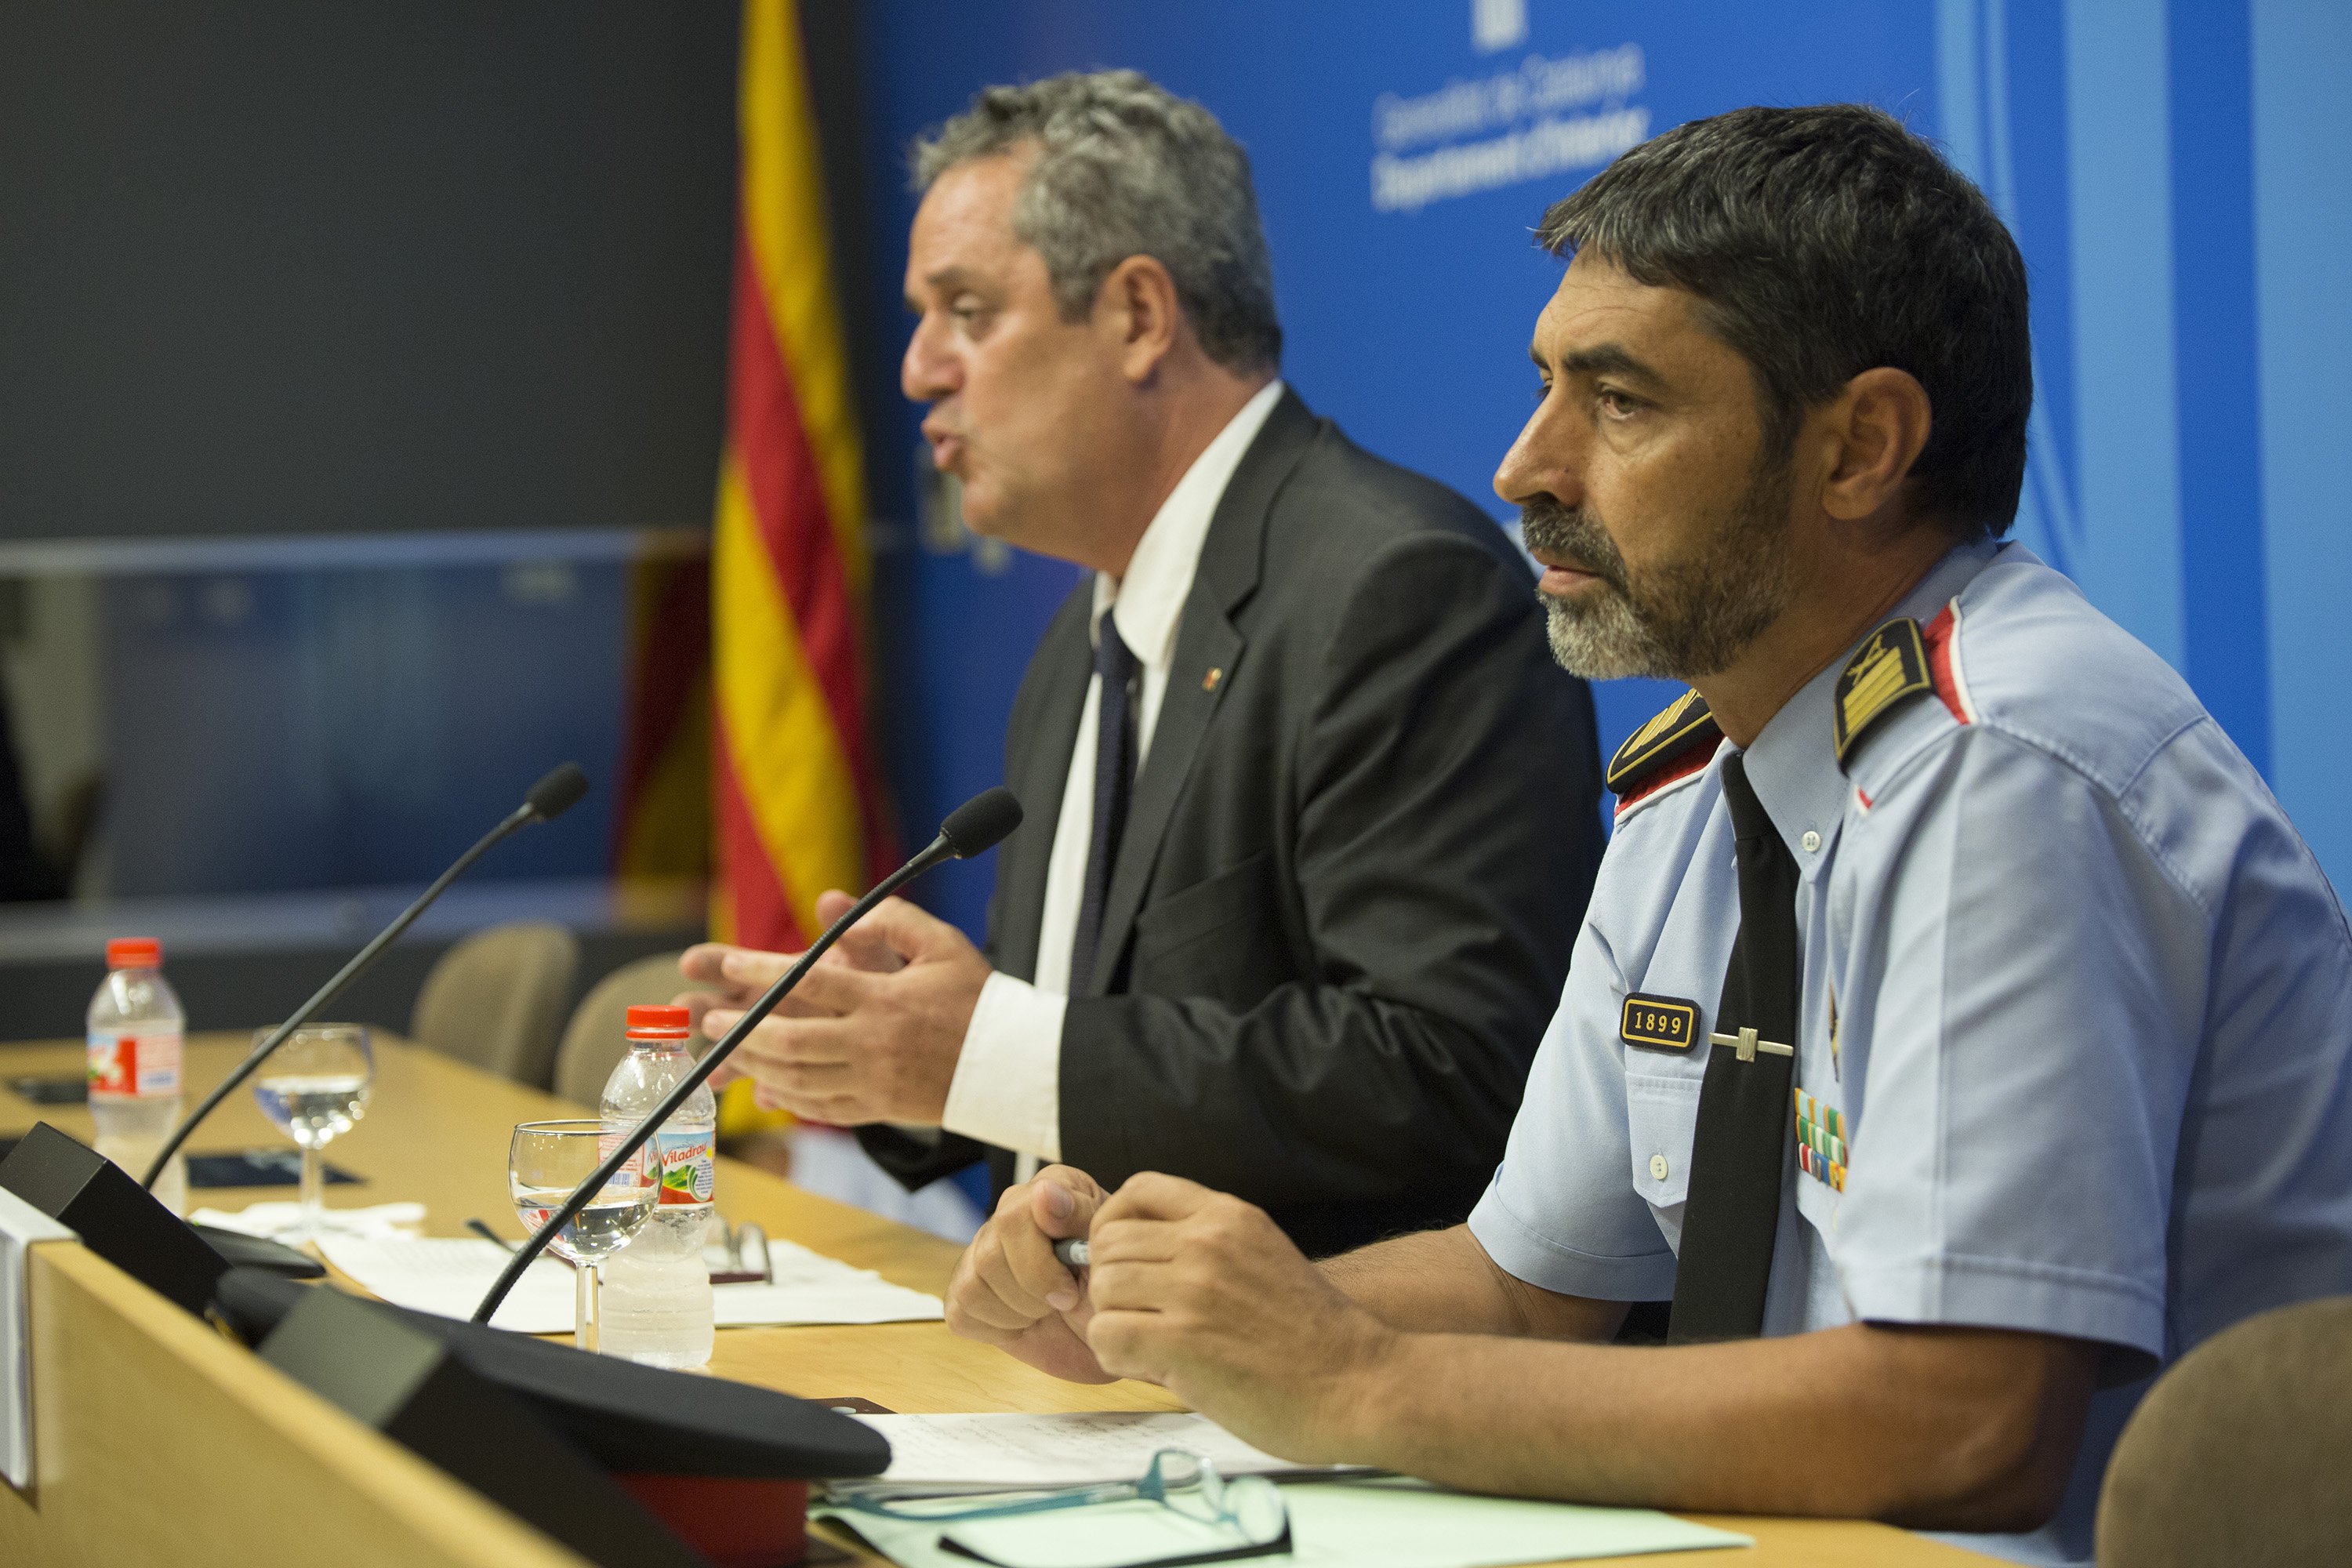 Forn and Trapero asked Spanish officials for there to be no violence during referendum